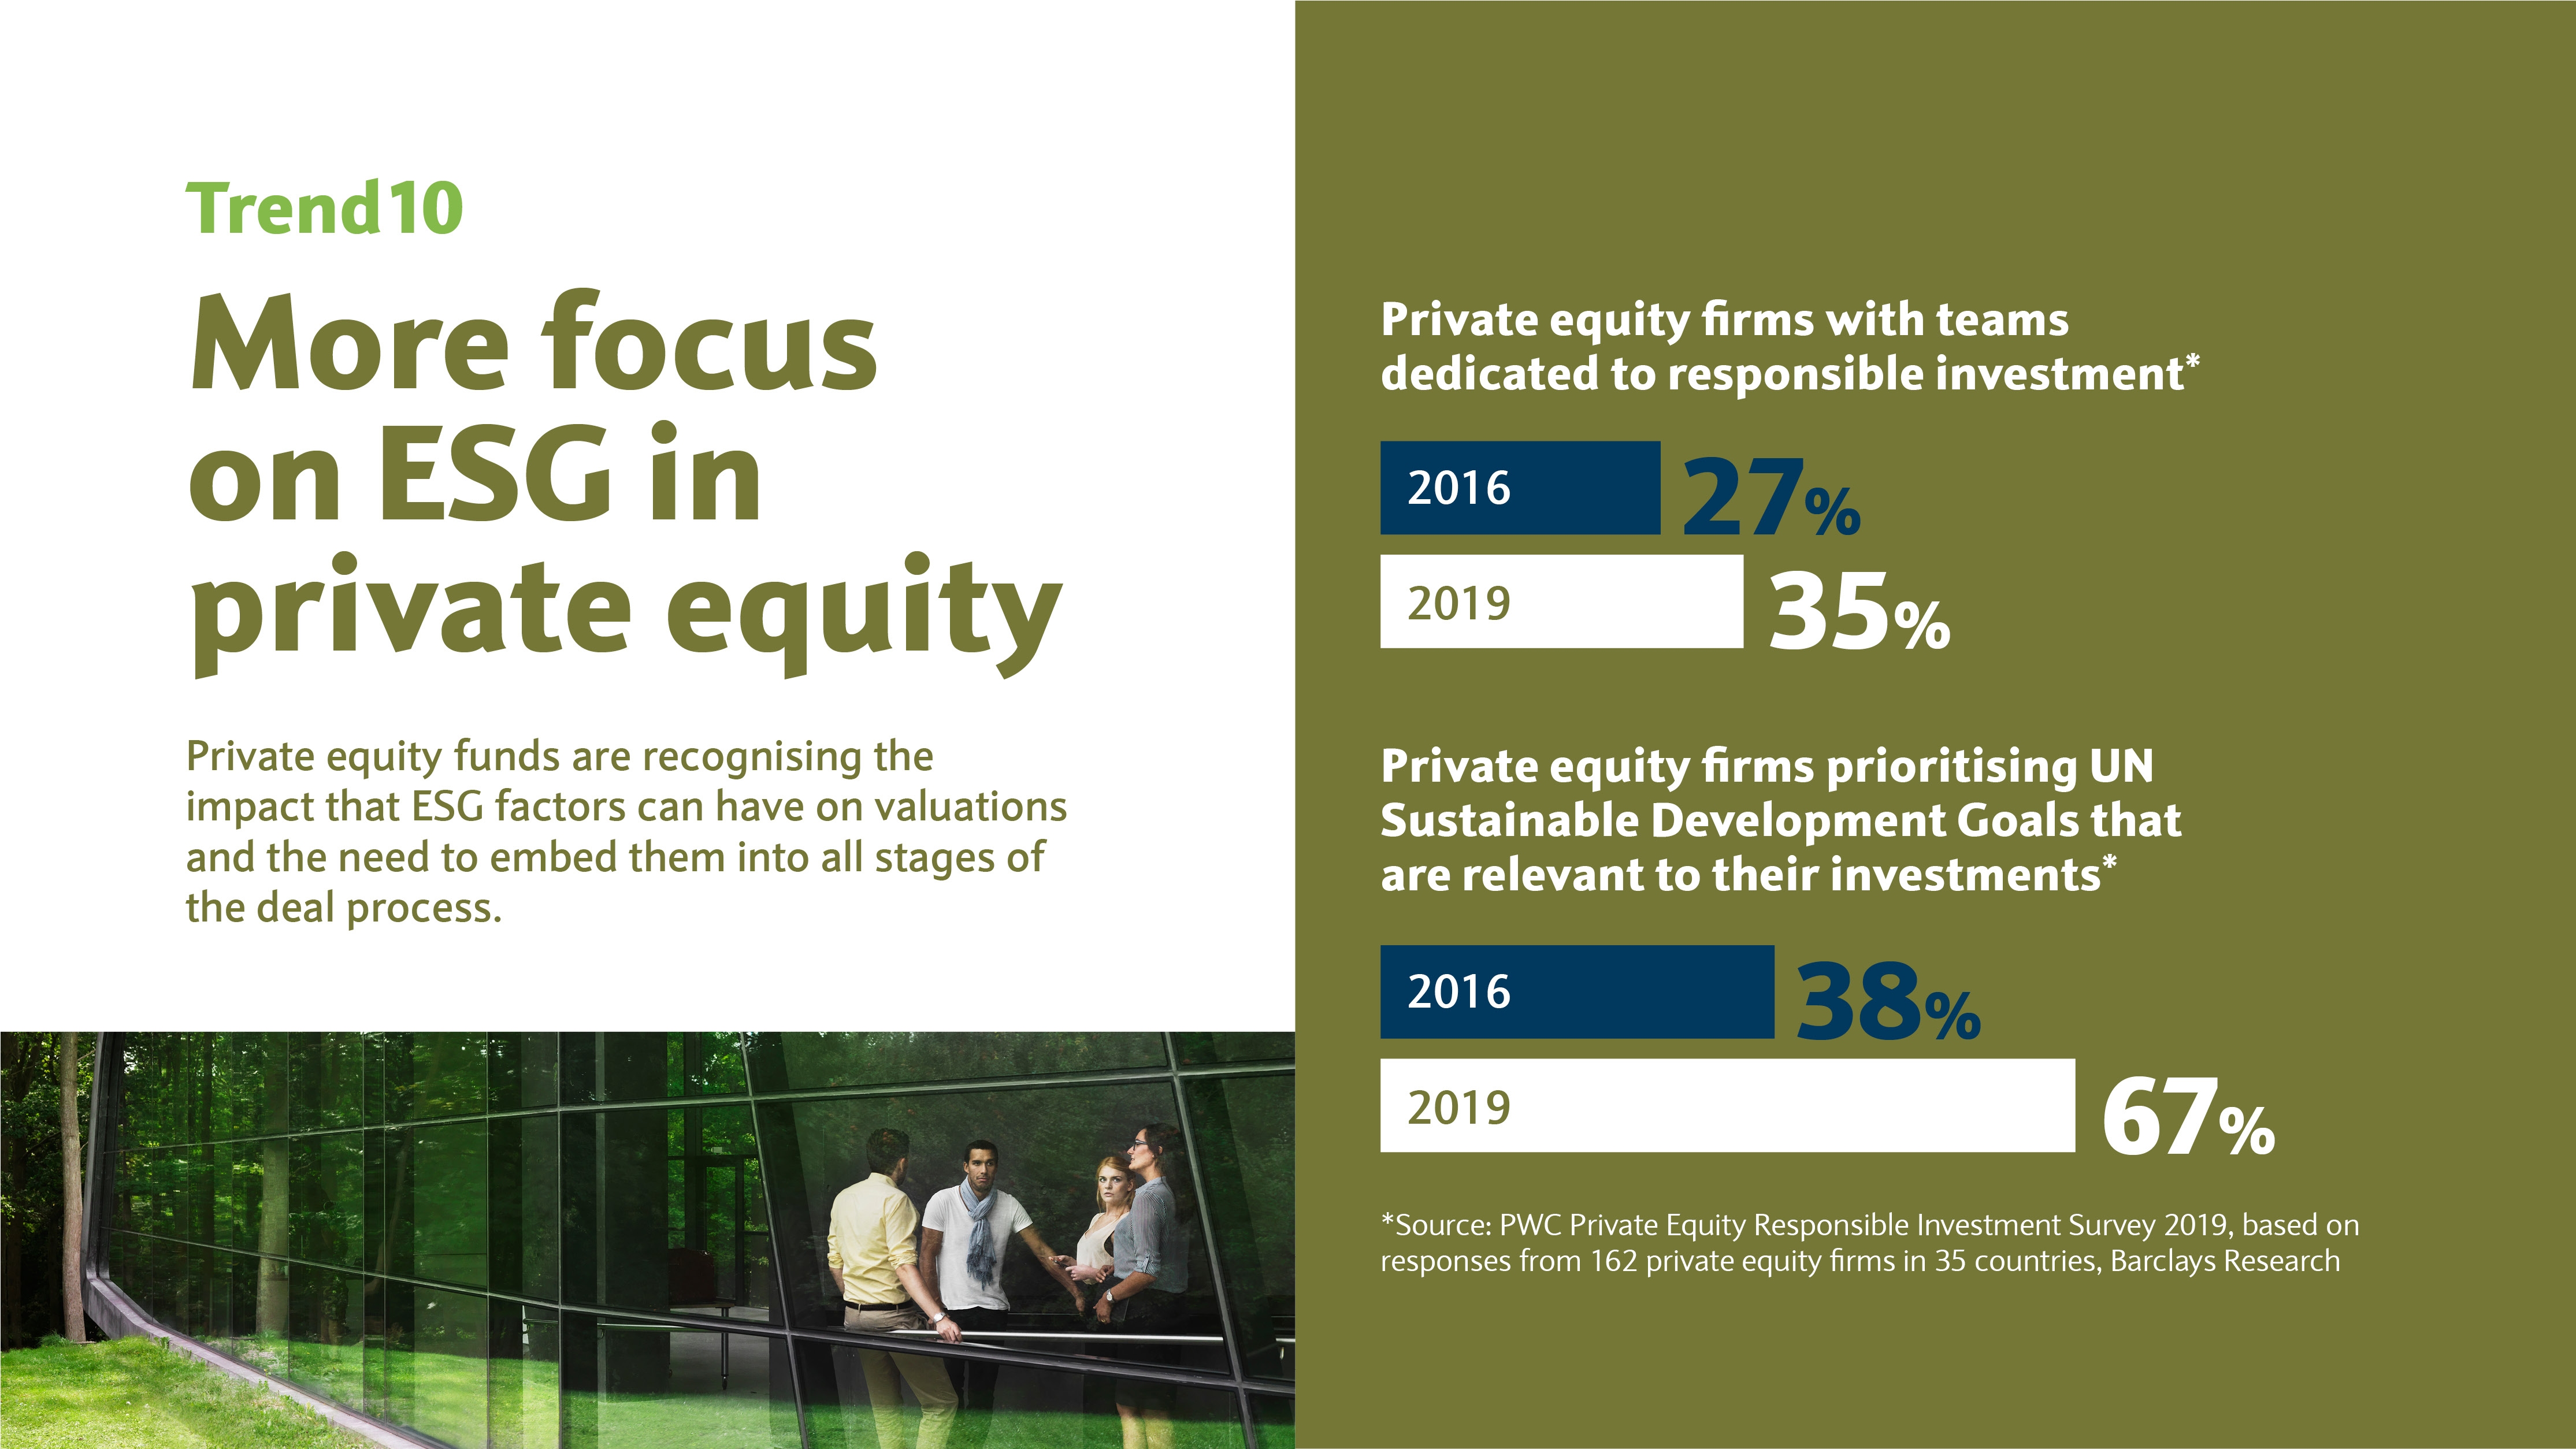 More focus on ESG in private equity